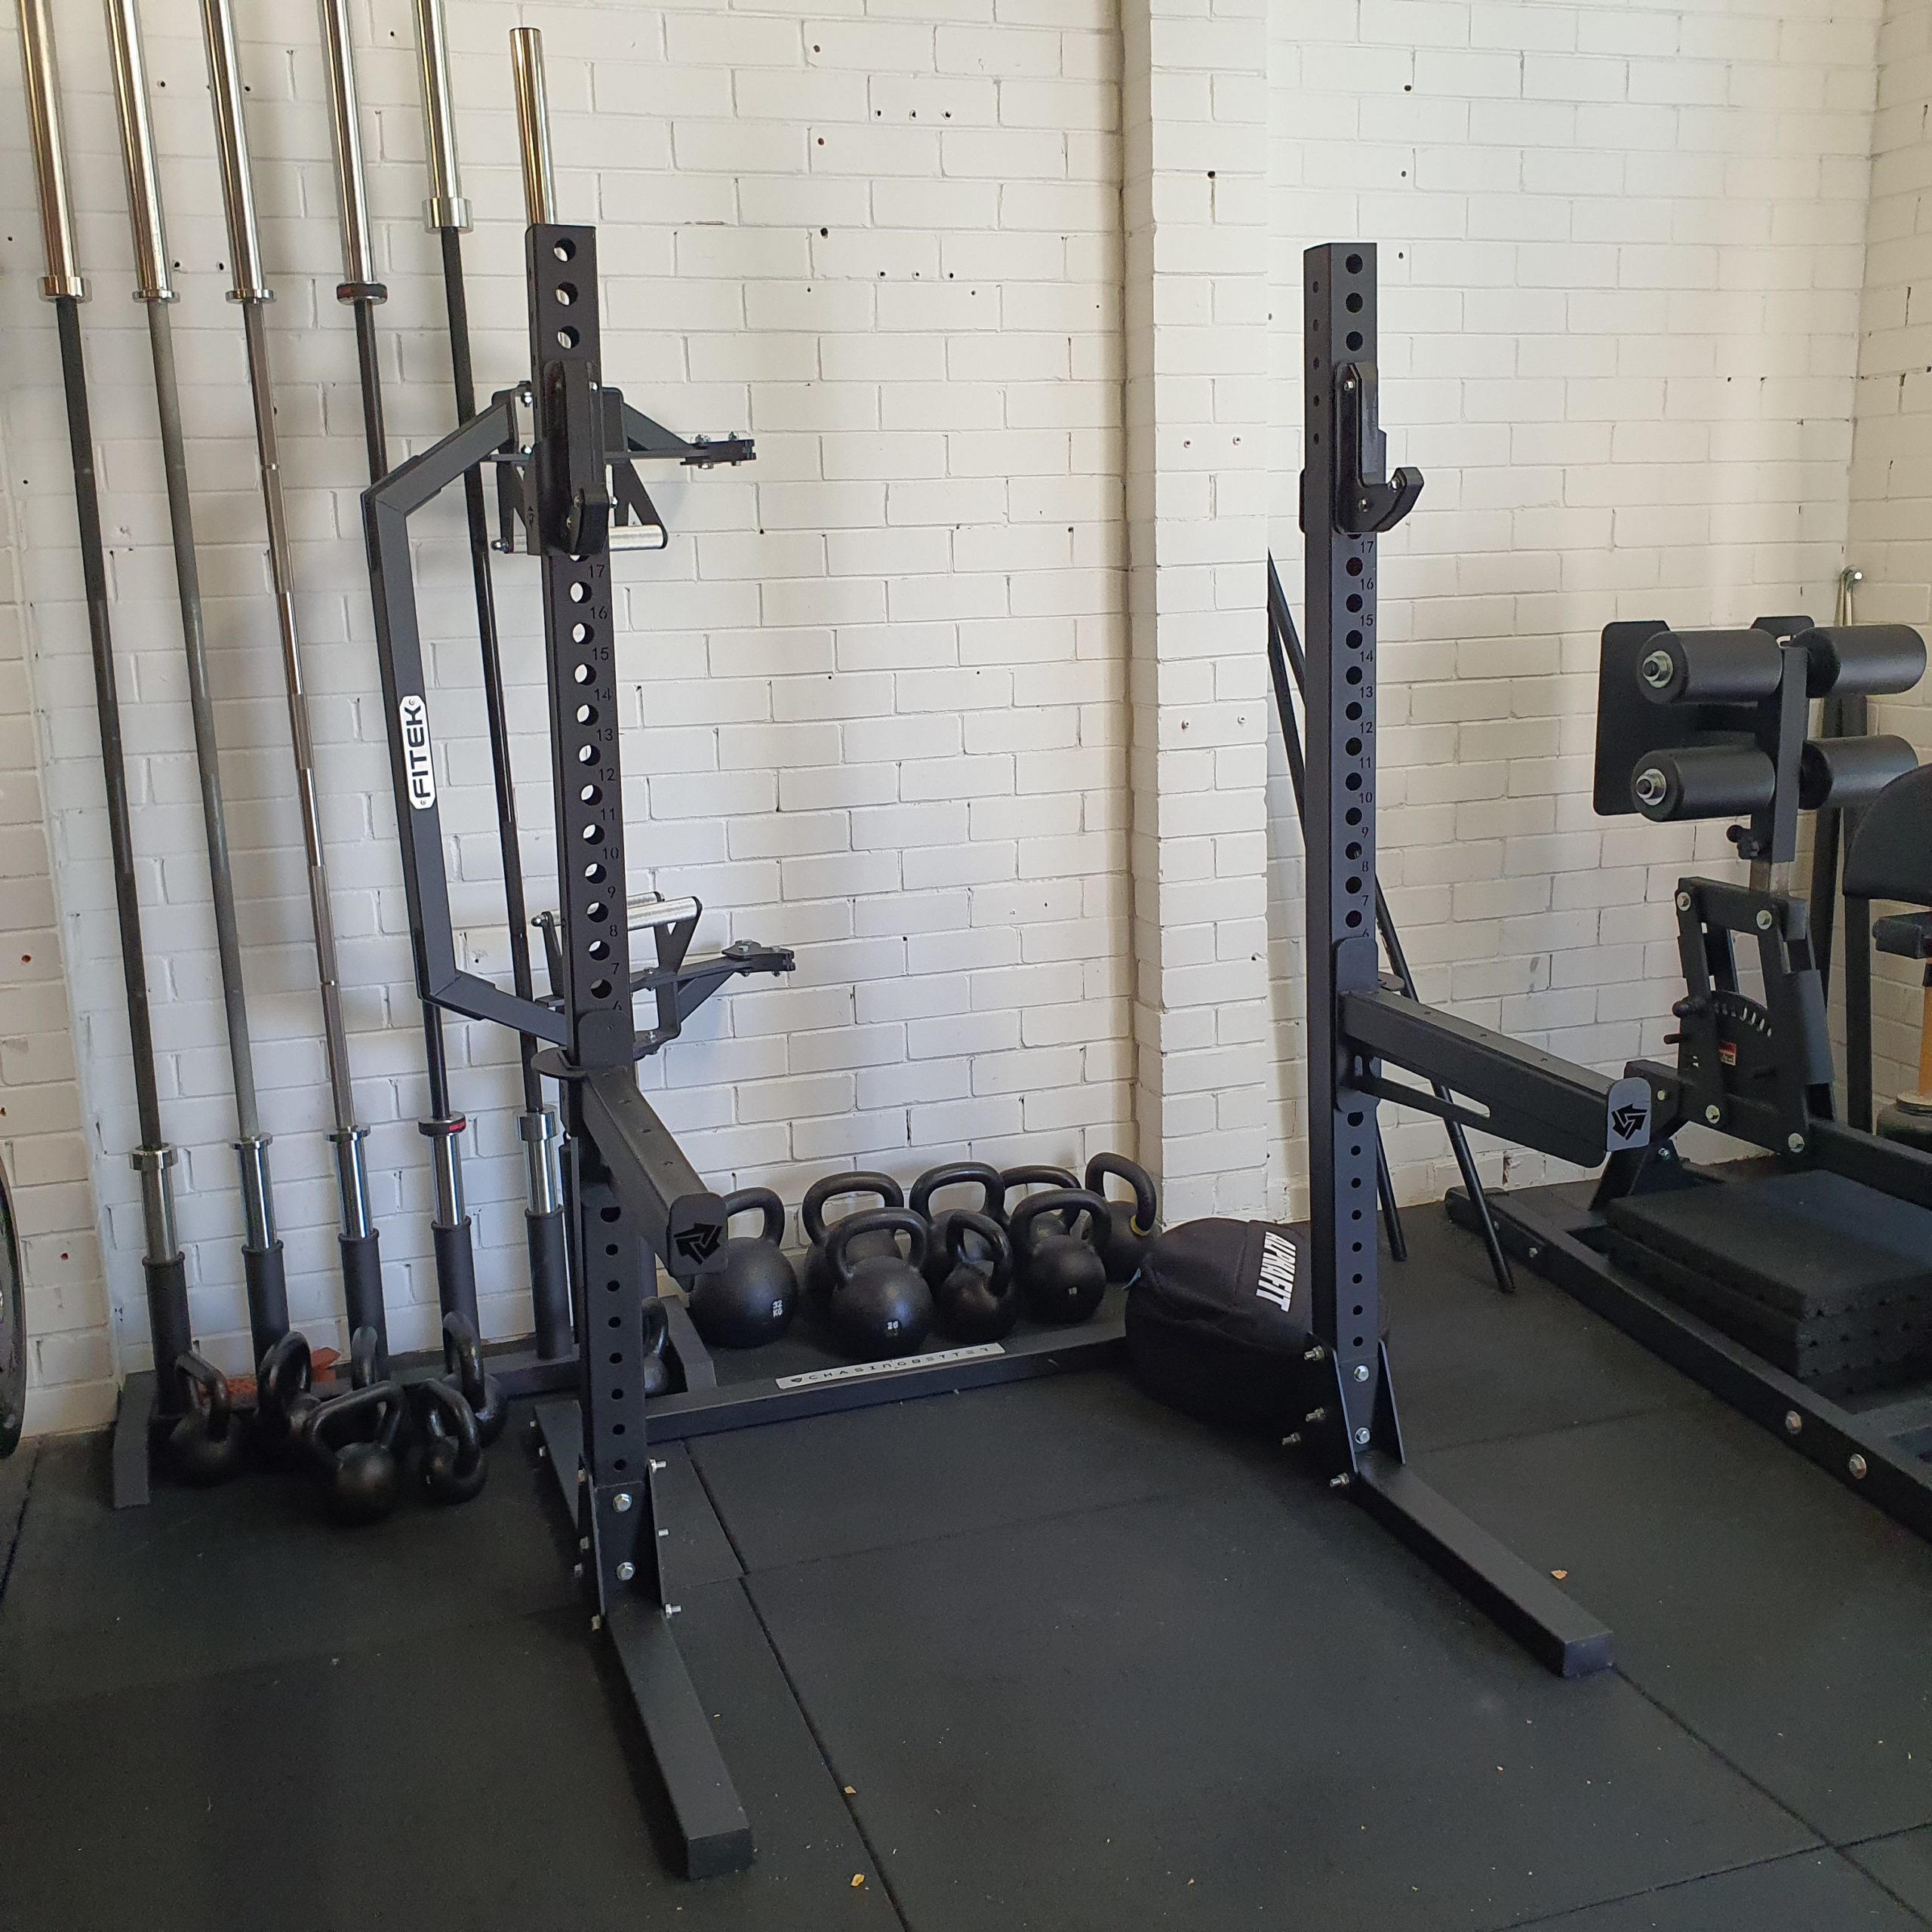 Chasing Better Squat Stand Review – Best Value Quality Squat Stand in Australia?